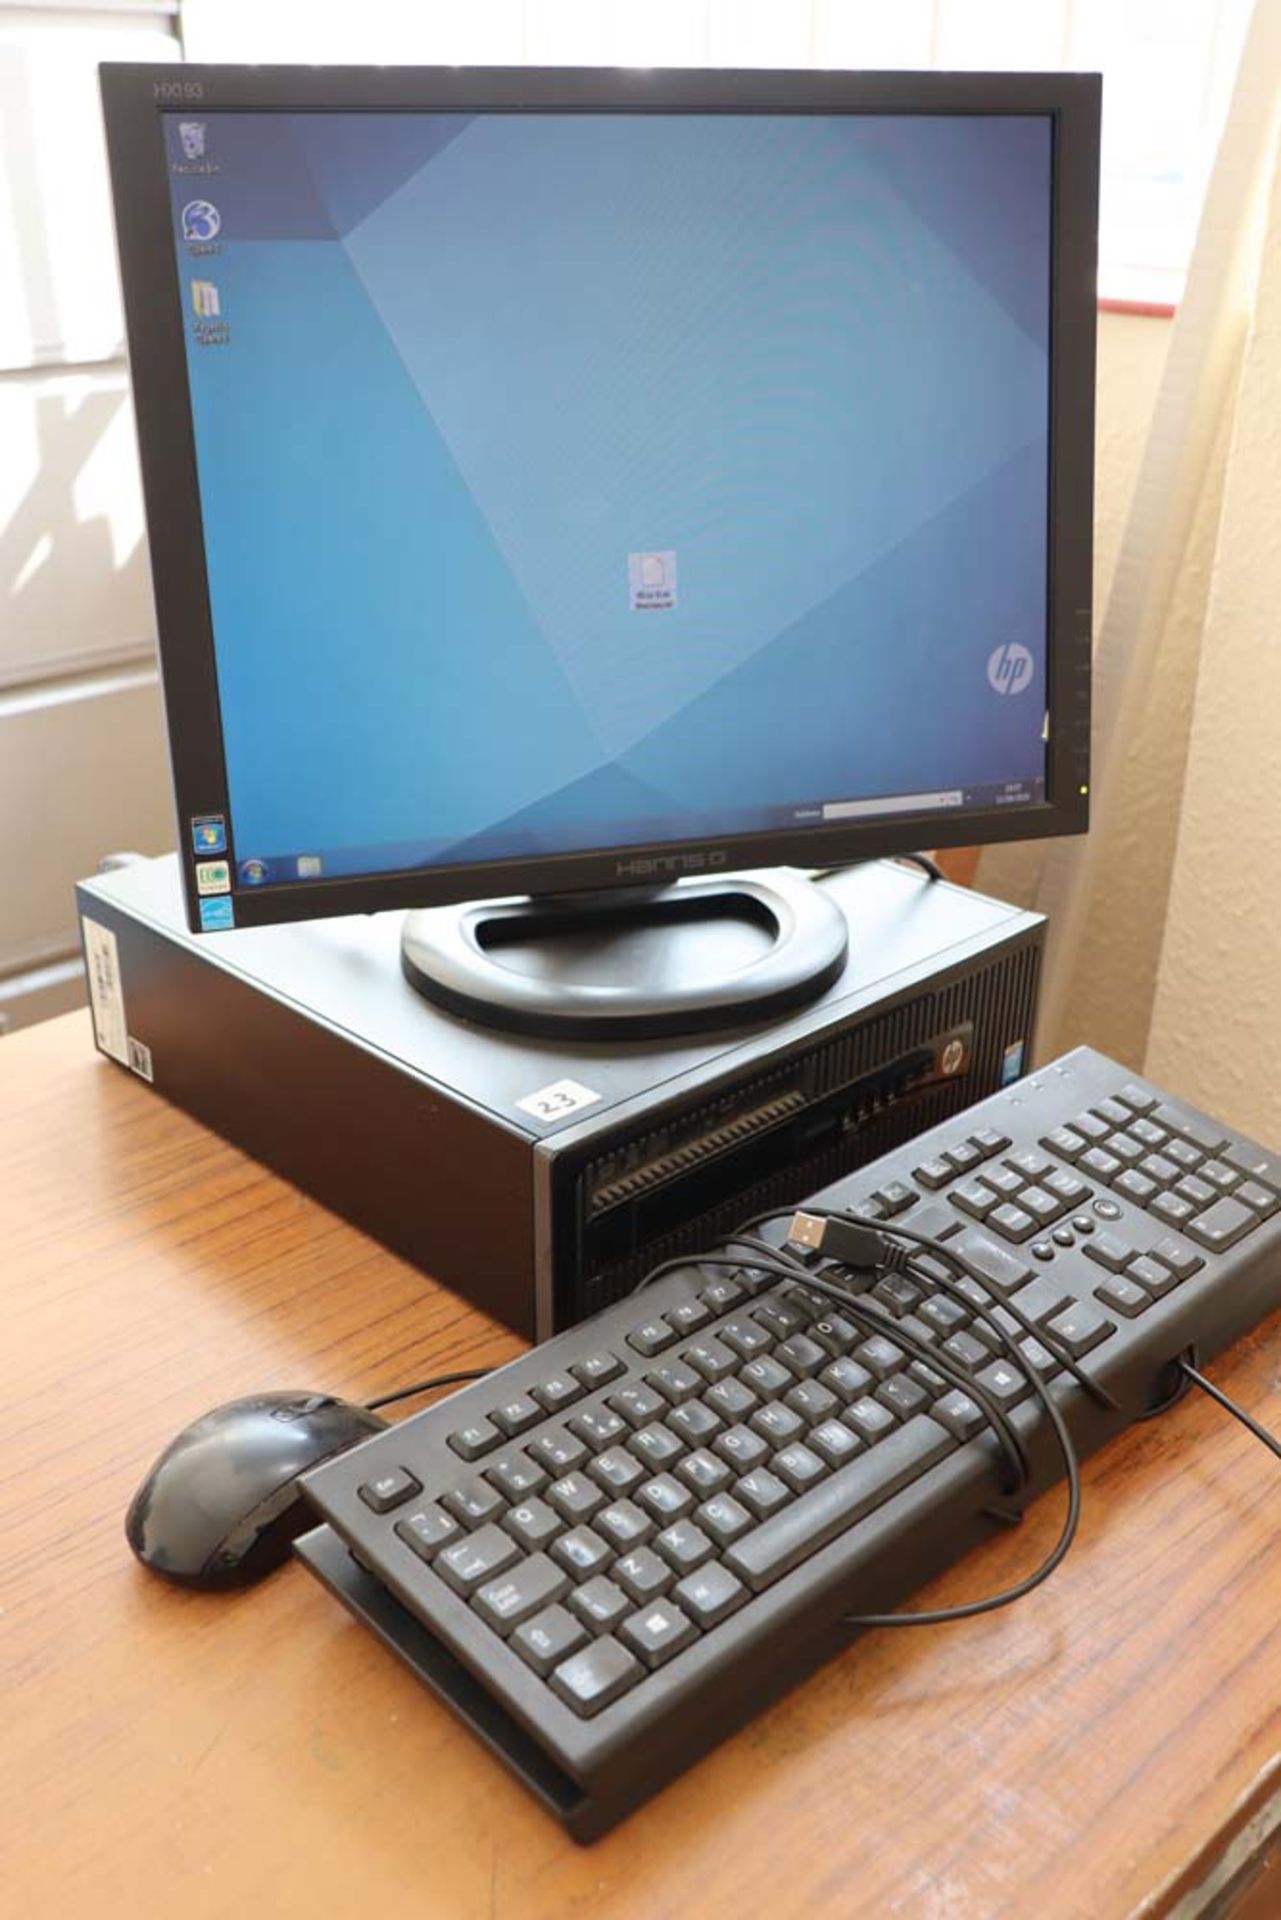 4 PC's including HP Pro, with monitor, keyboard and mouse and 3 HP Pro desk computer with monitor, - Image 5 of 7